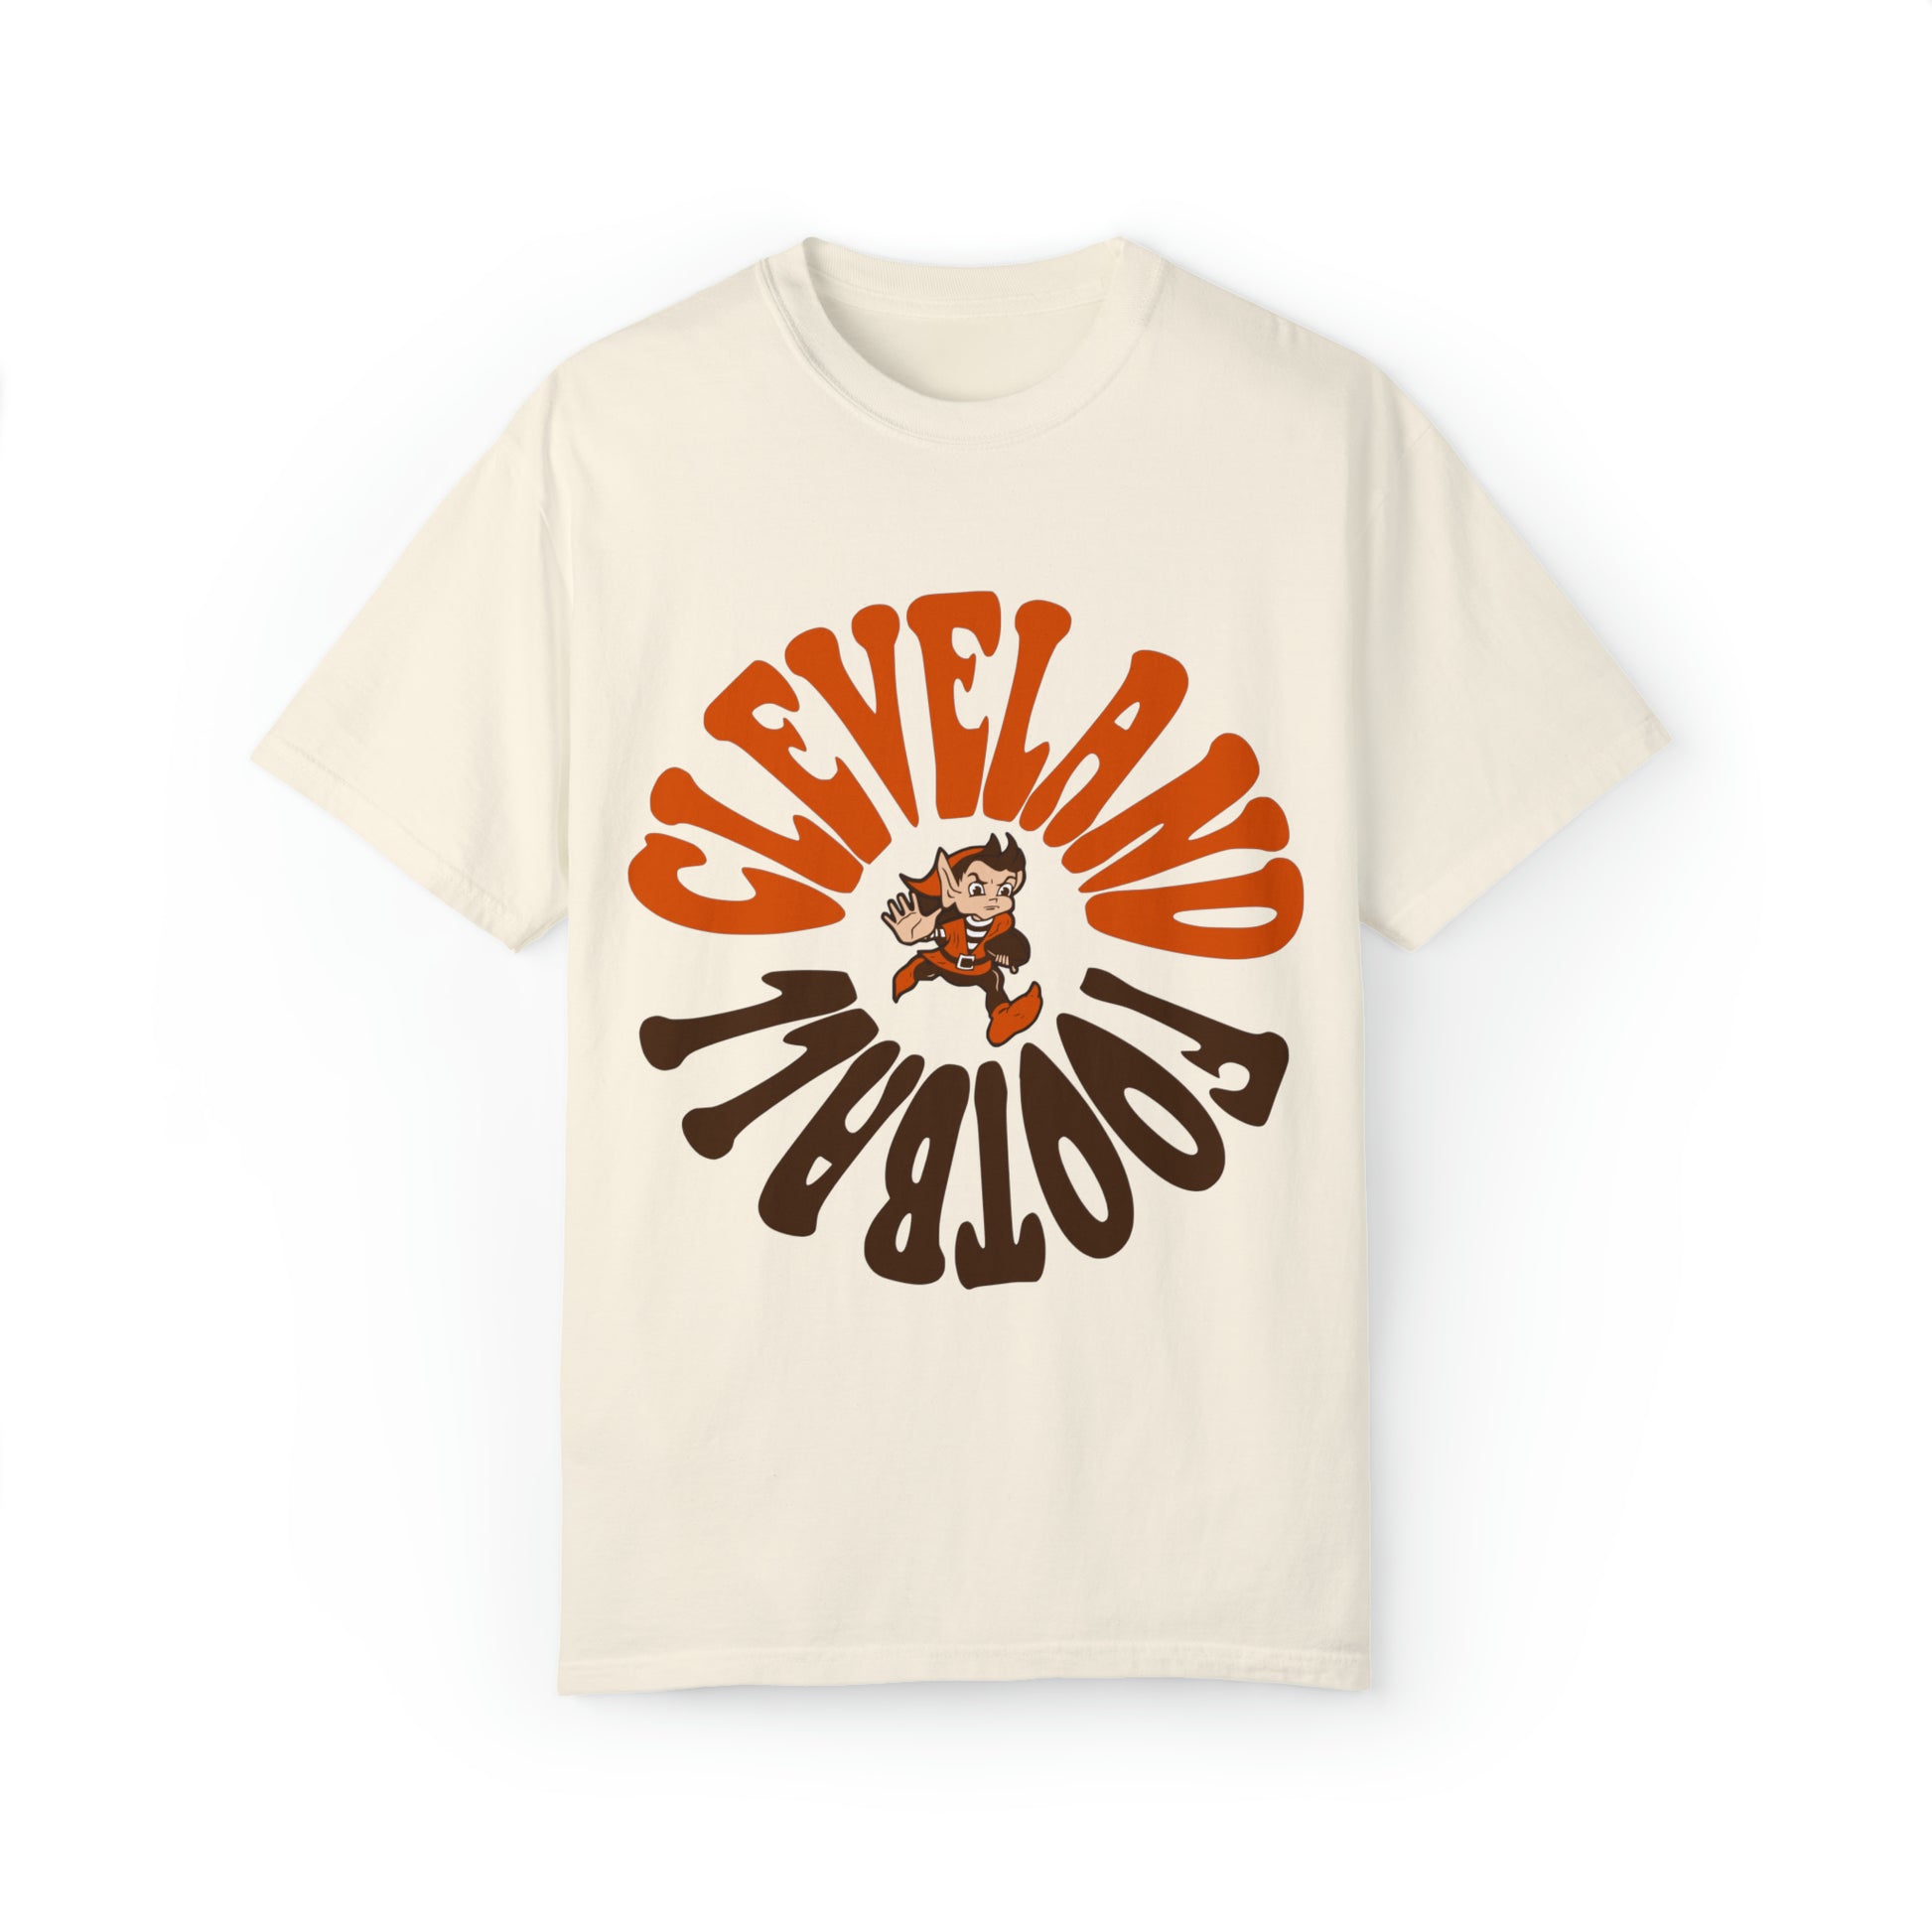 Lids Cleveland Browns Refried Apparel Women's Sustainable Vintage